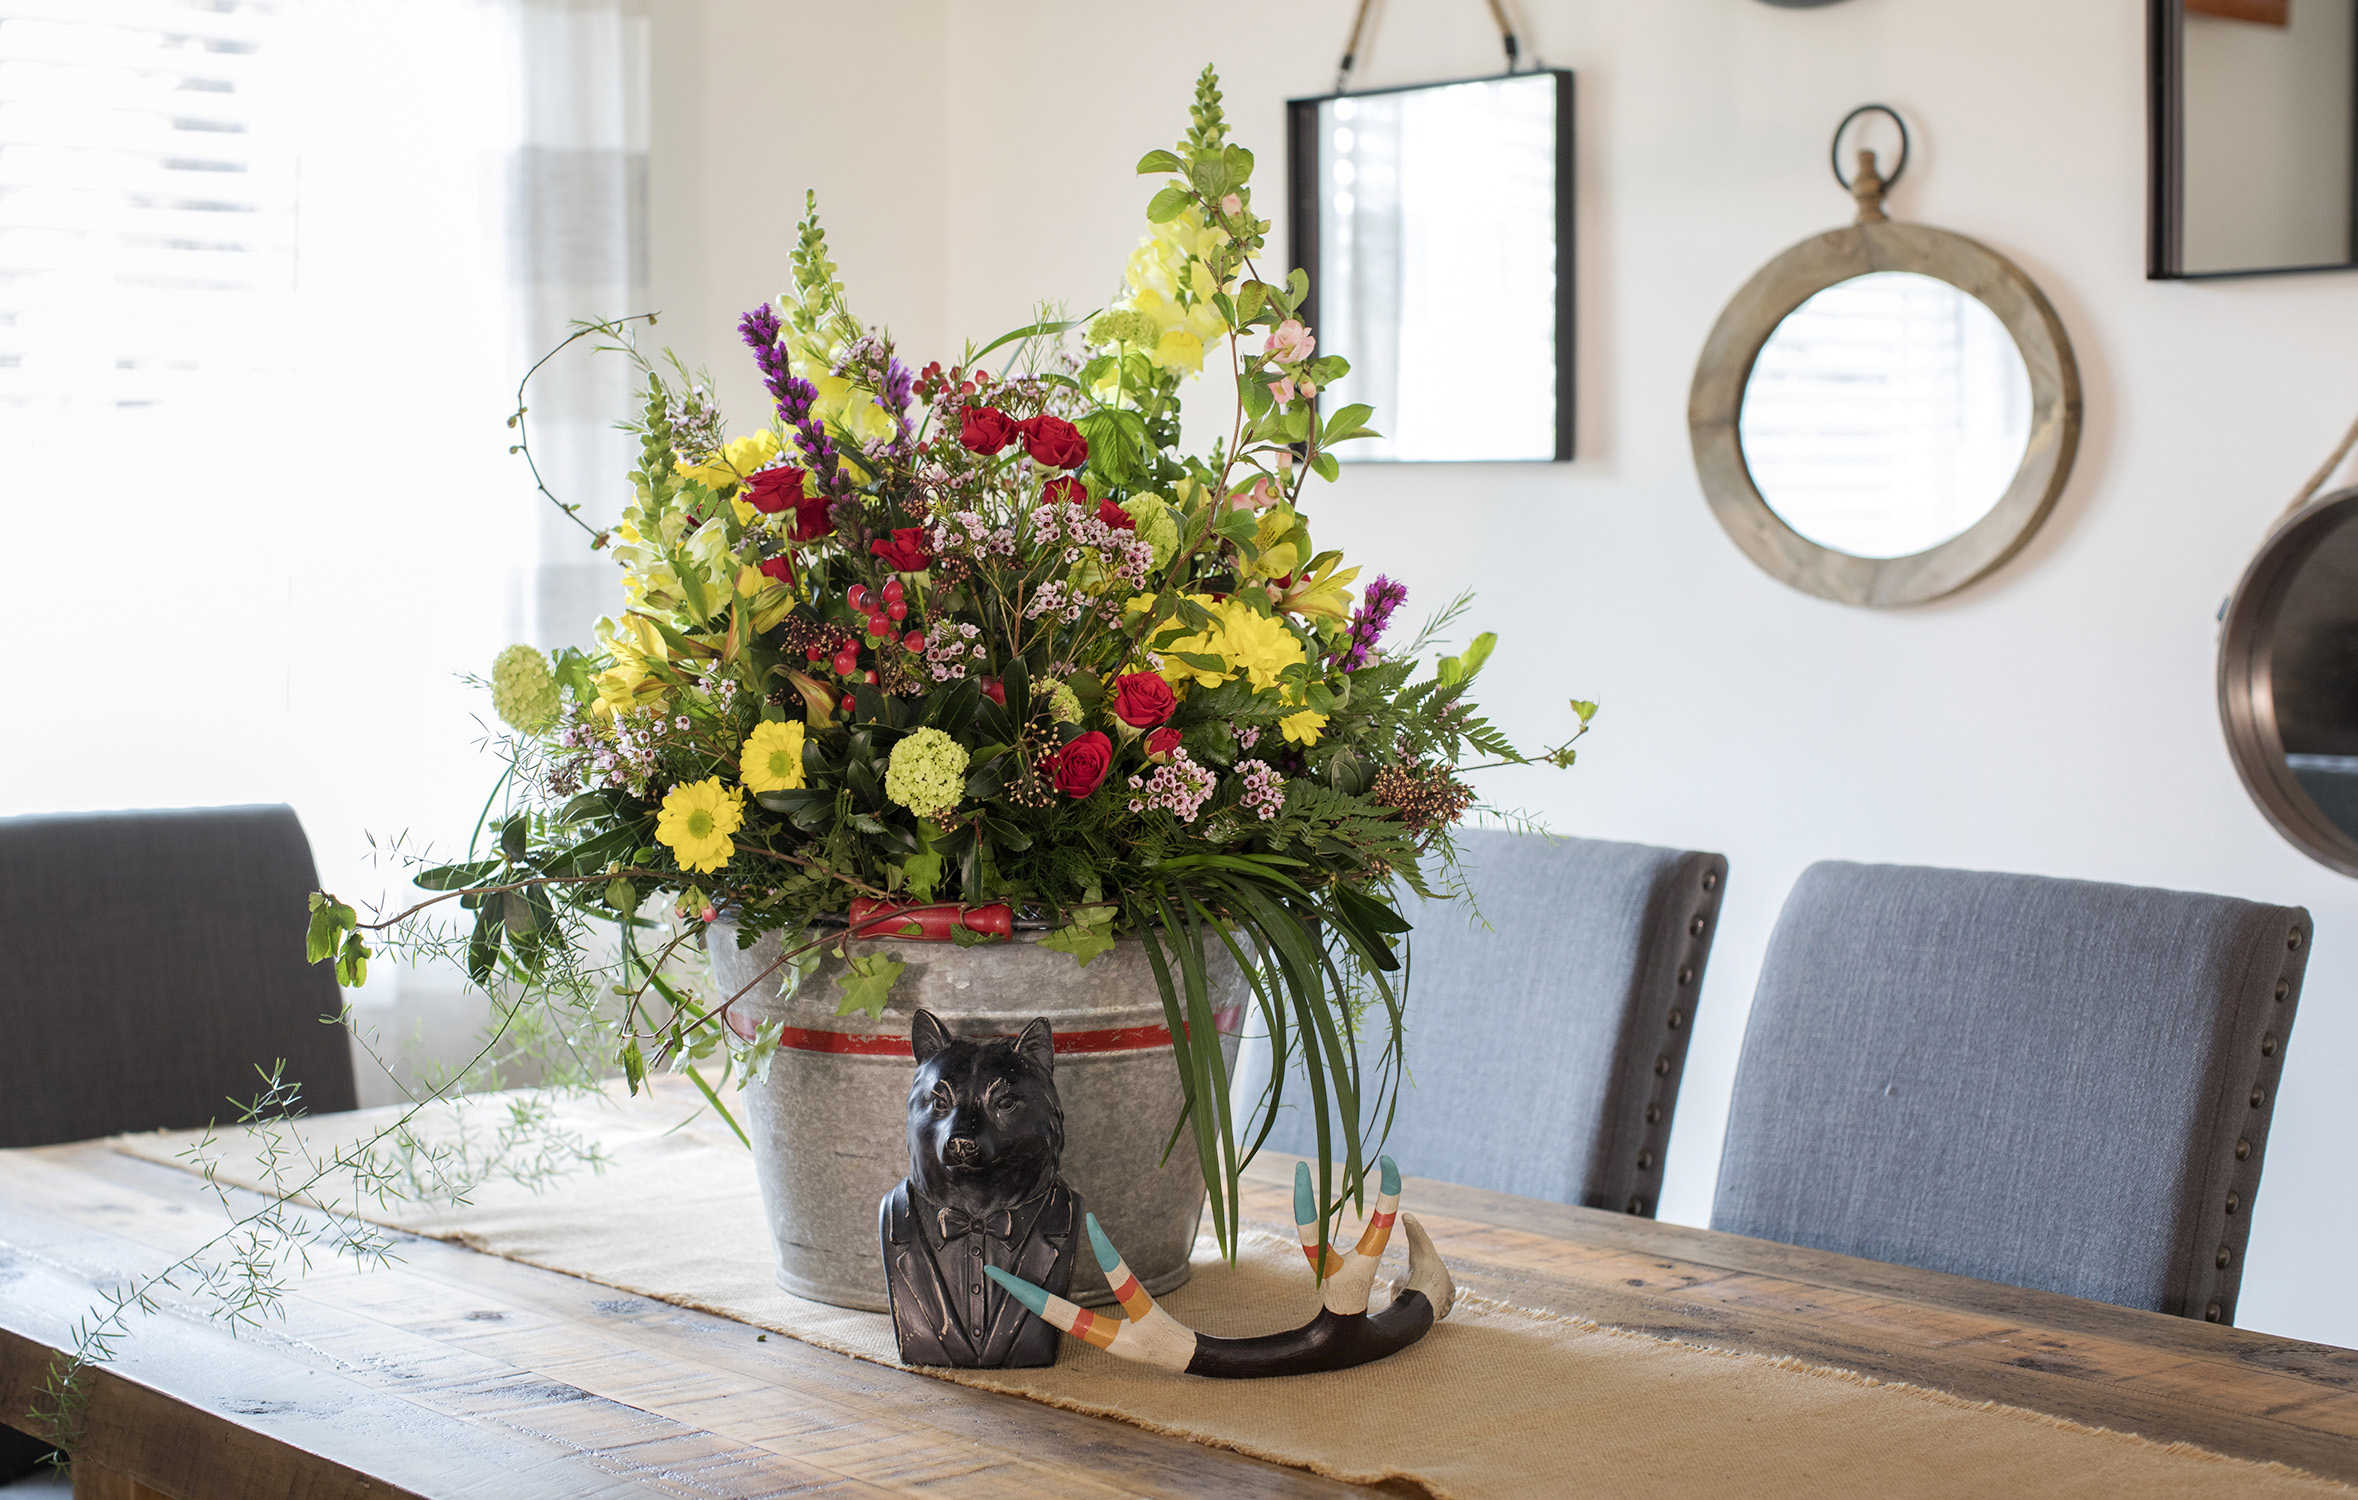 A bright bouquet is always a welcome addition to a dining-room table.